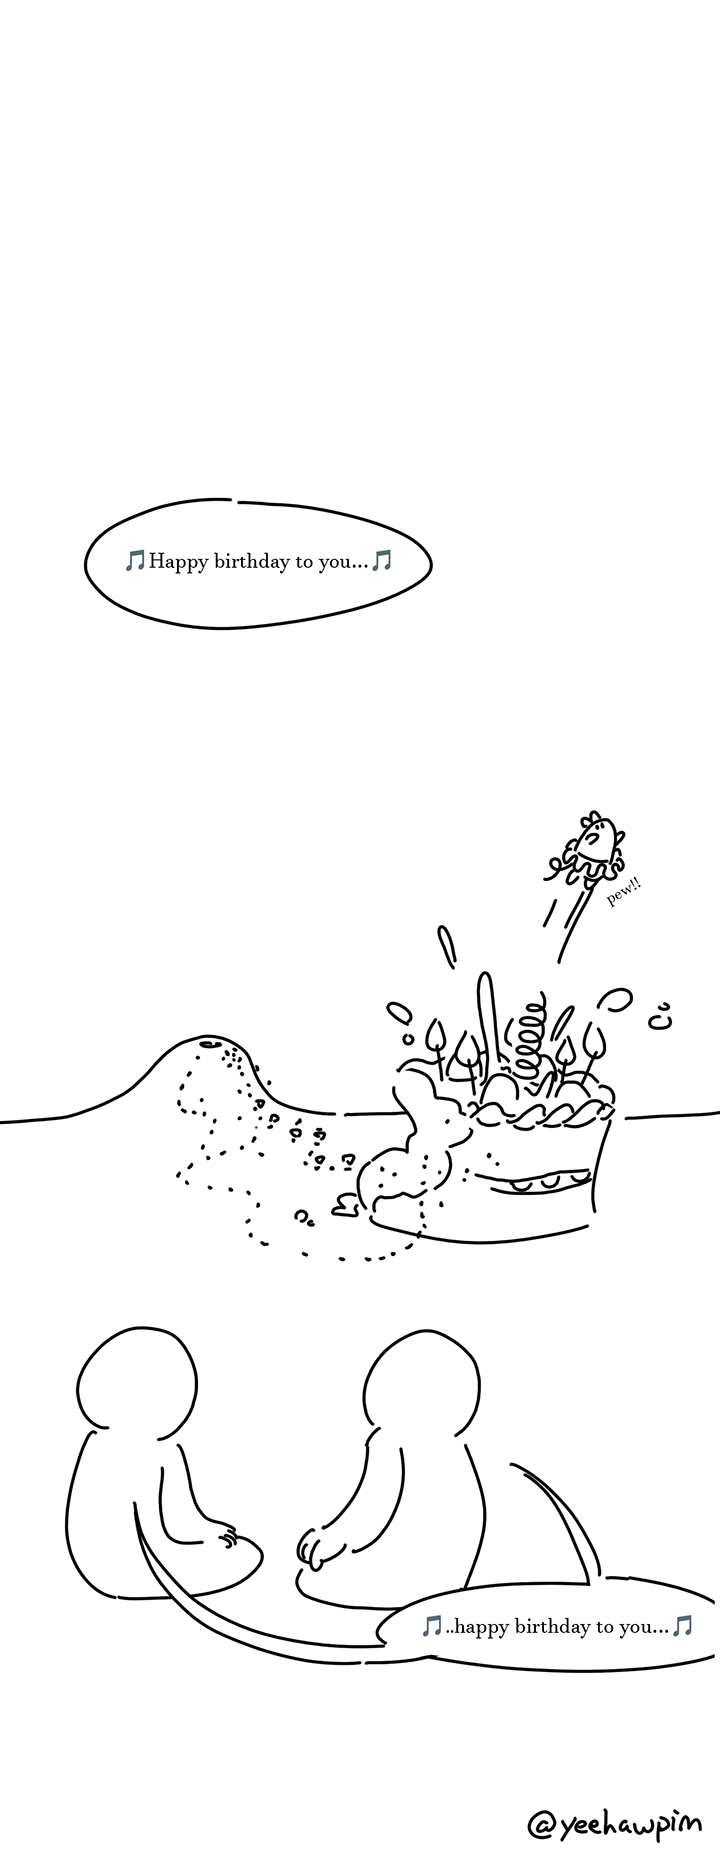 Speech bubble with music note symbols that says, "Happy birthday to you..." Panel 25: The cake is half carried away by ants. The ants emerge from a small anthill in several lines. There are now lit candles on the cake and splotches of it fly off as the lil' guy springs out of it on a spring. The lil' guy is wearing a tutu and there's a sound effect that reads, "pew!!" The two kids sit looking on, singing, "...happy birthday to you..."